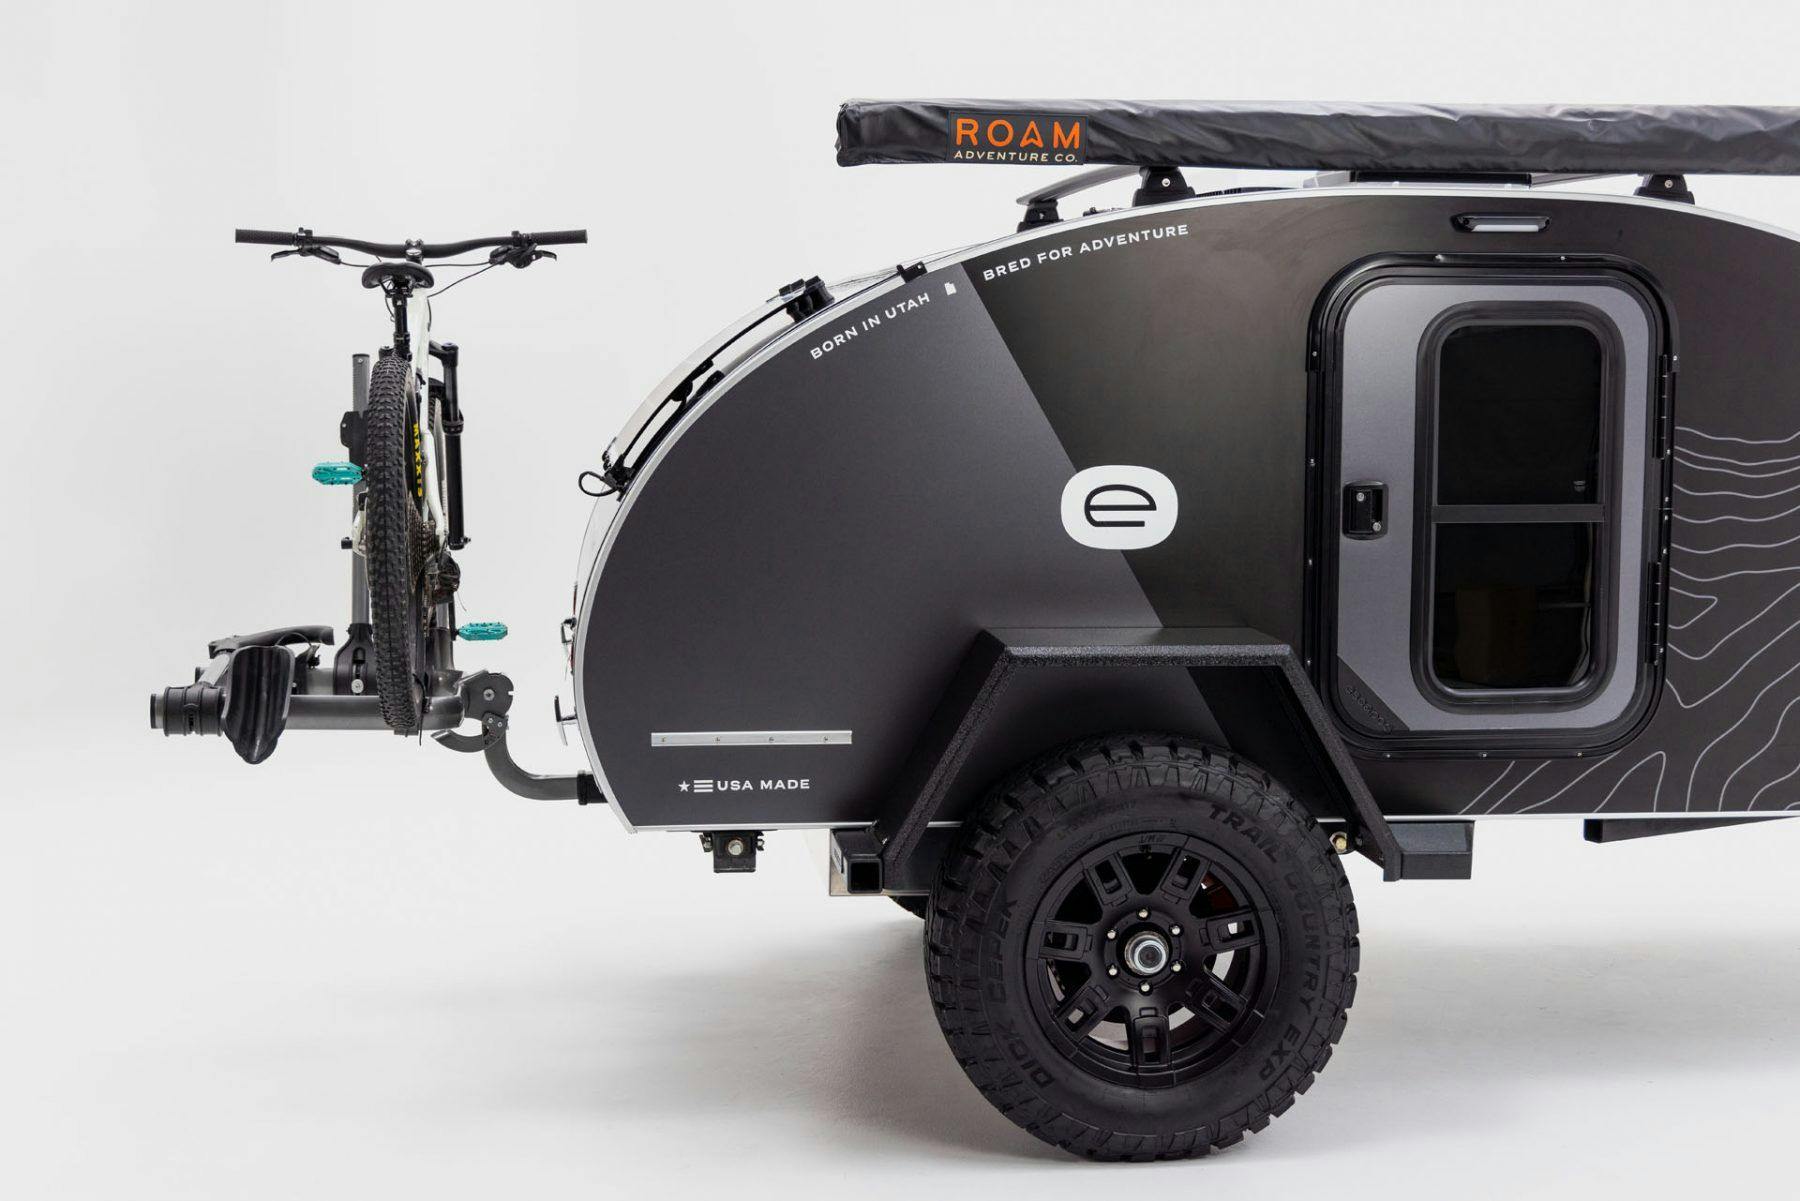 A grey and black teardrop trailer with a rear hitch receiver bike rack mounted.